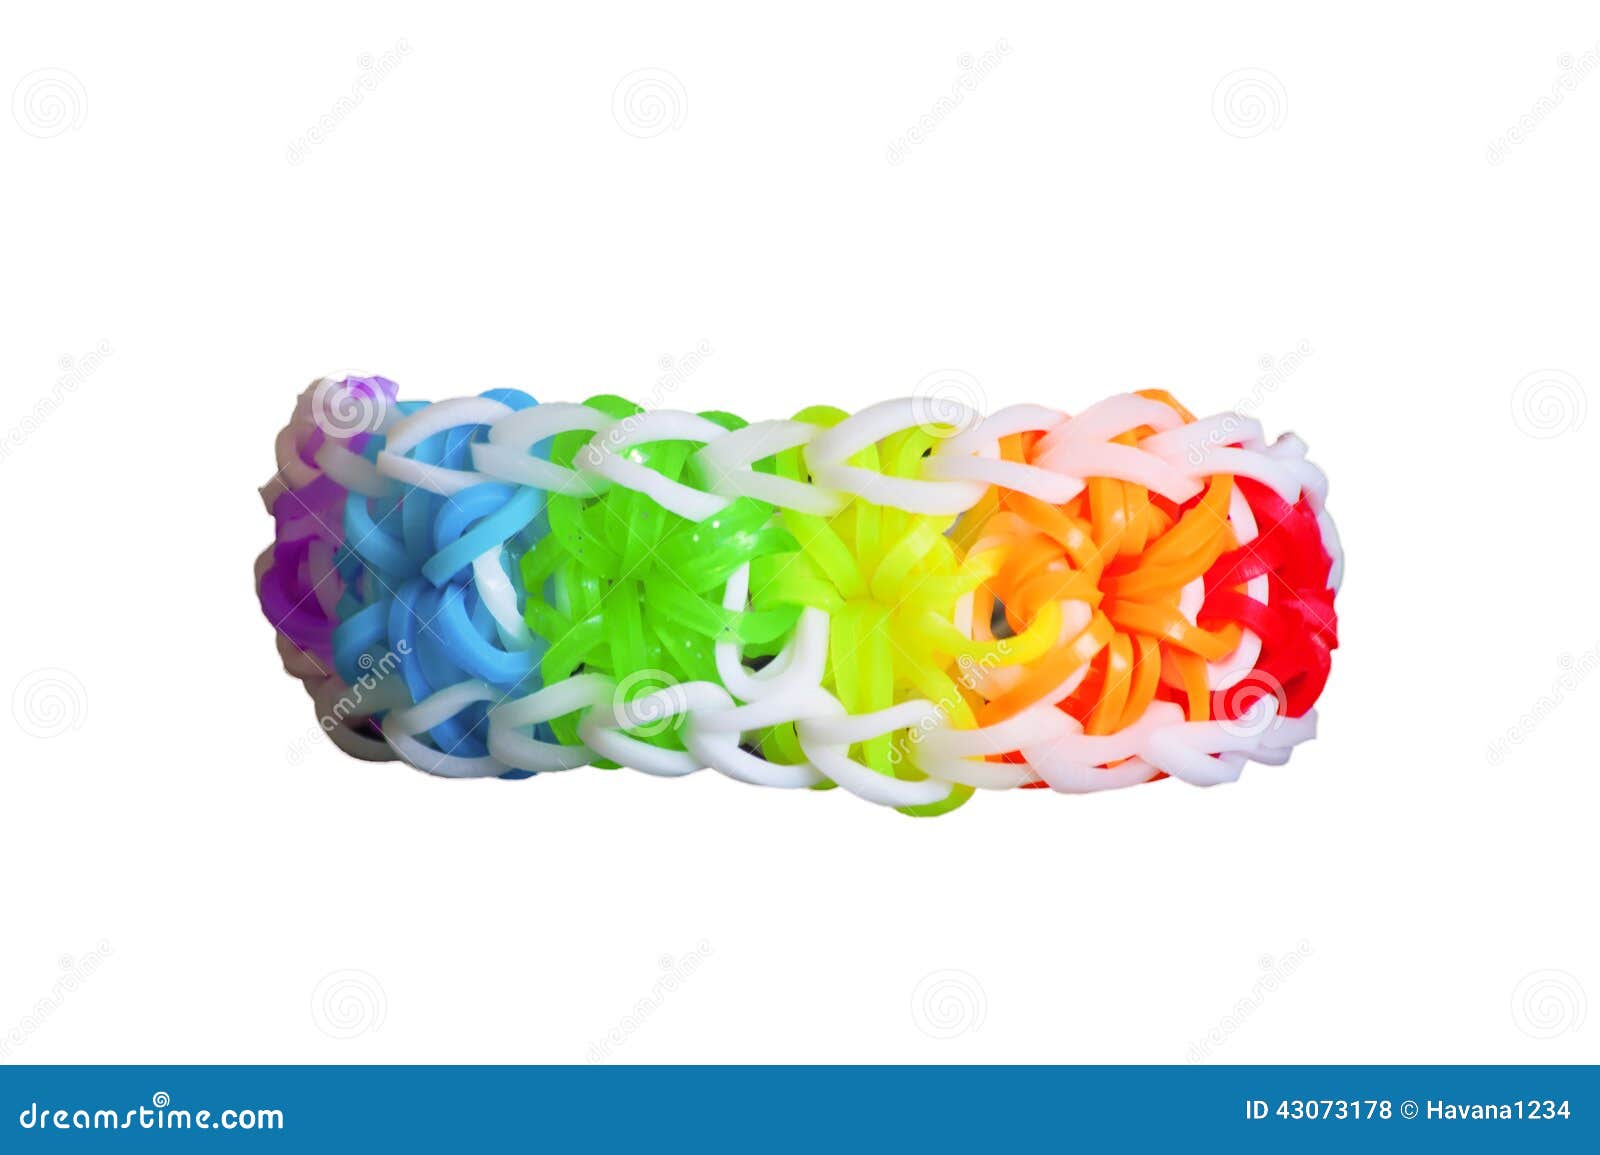 rainbow loom rubber bands